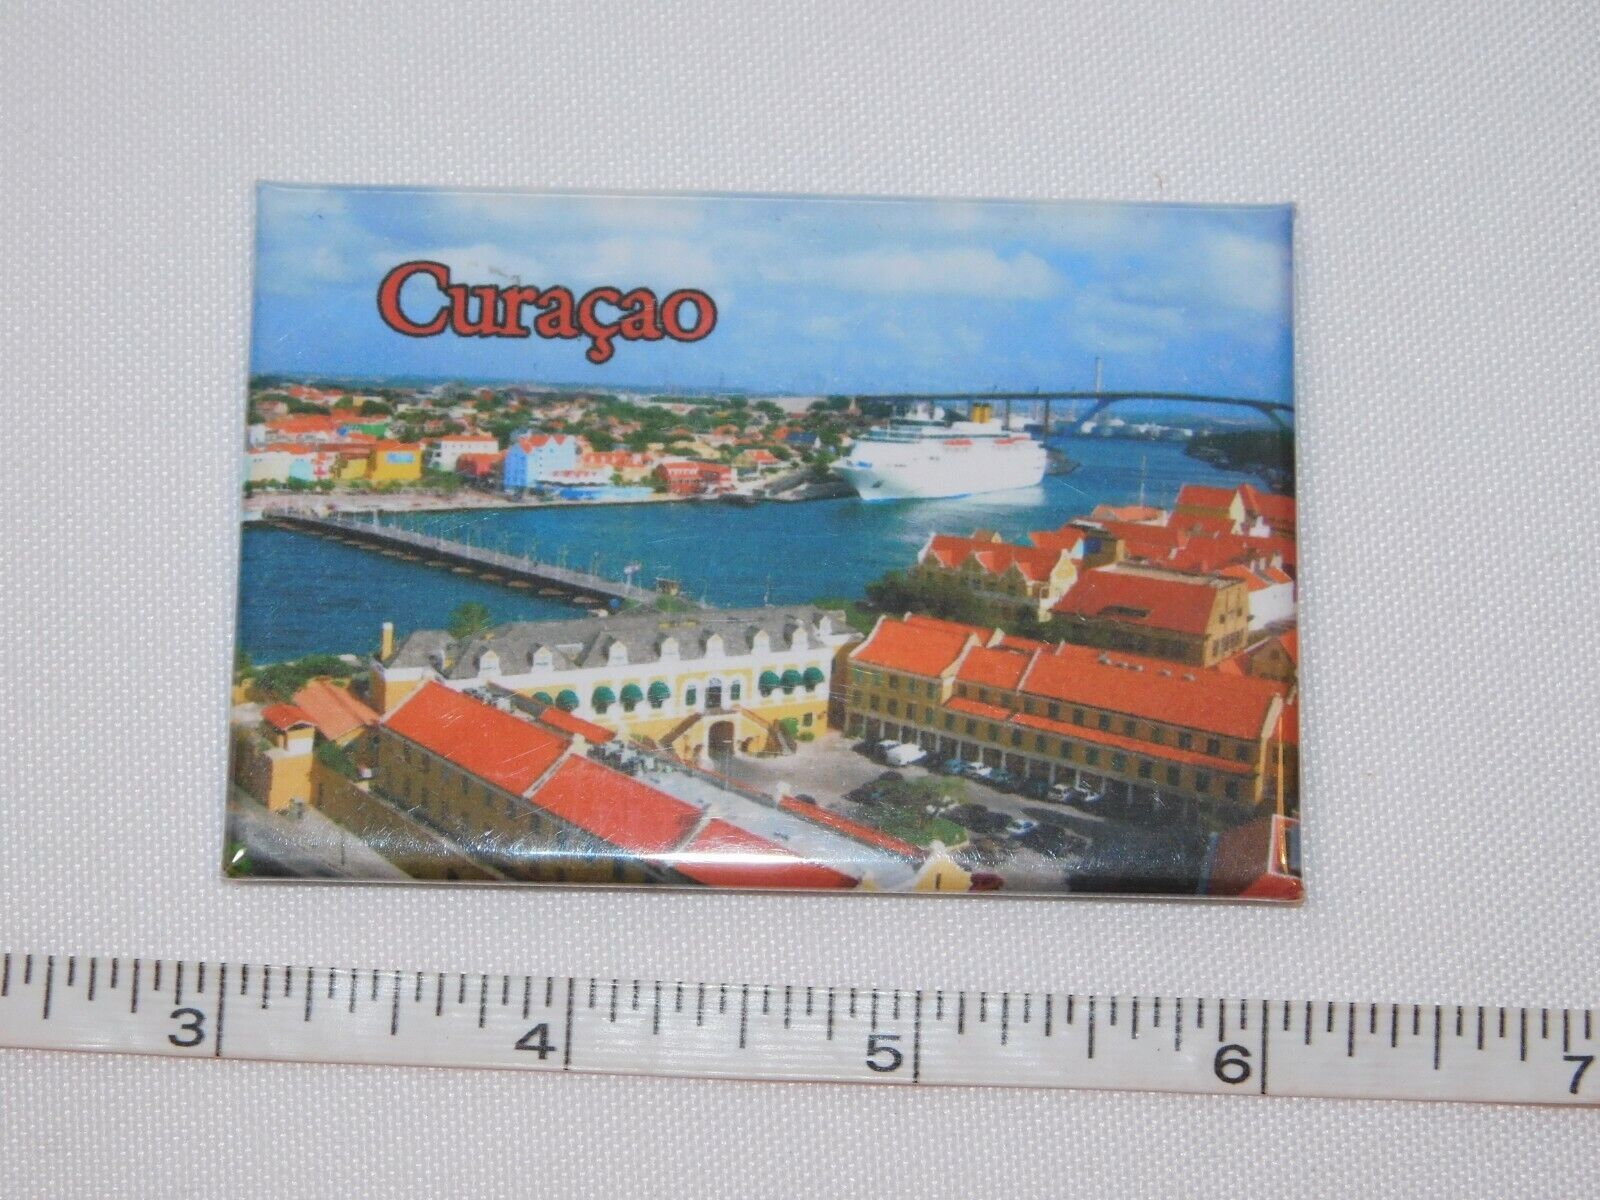 Primary image for Curacao Sunshine Souvenirs 3 1/8" x 2 1/8" fridge magnet refrigerator pre-owned